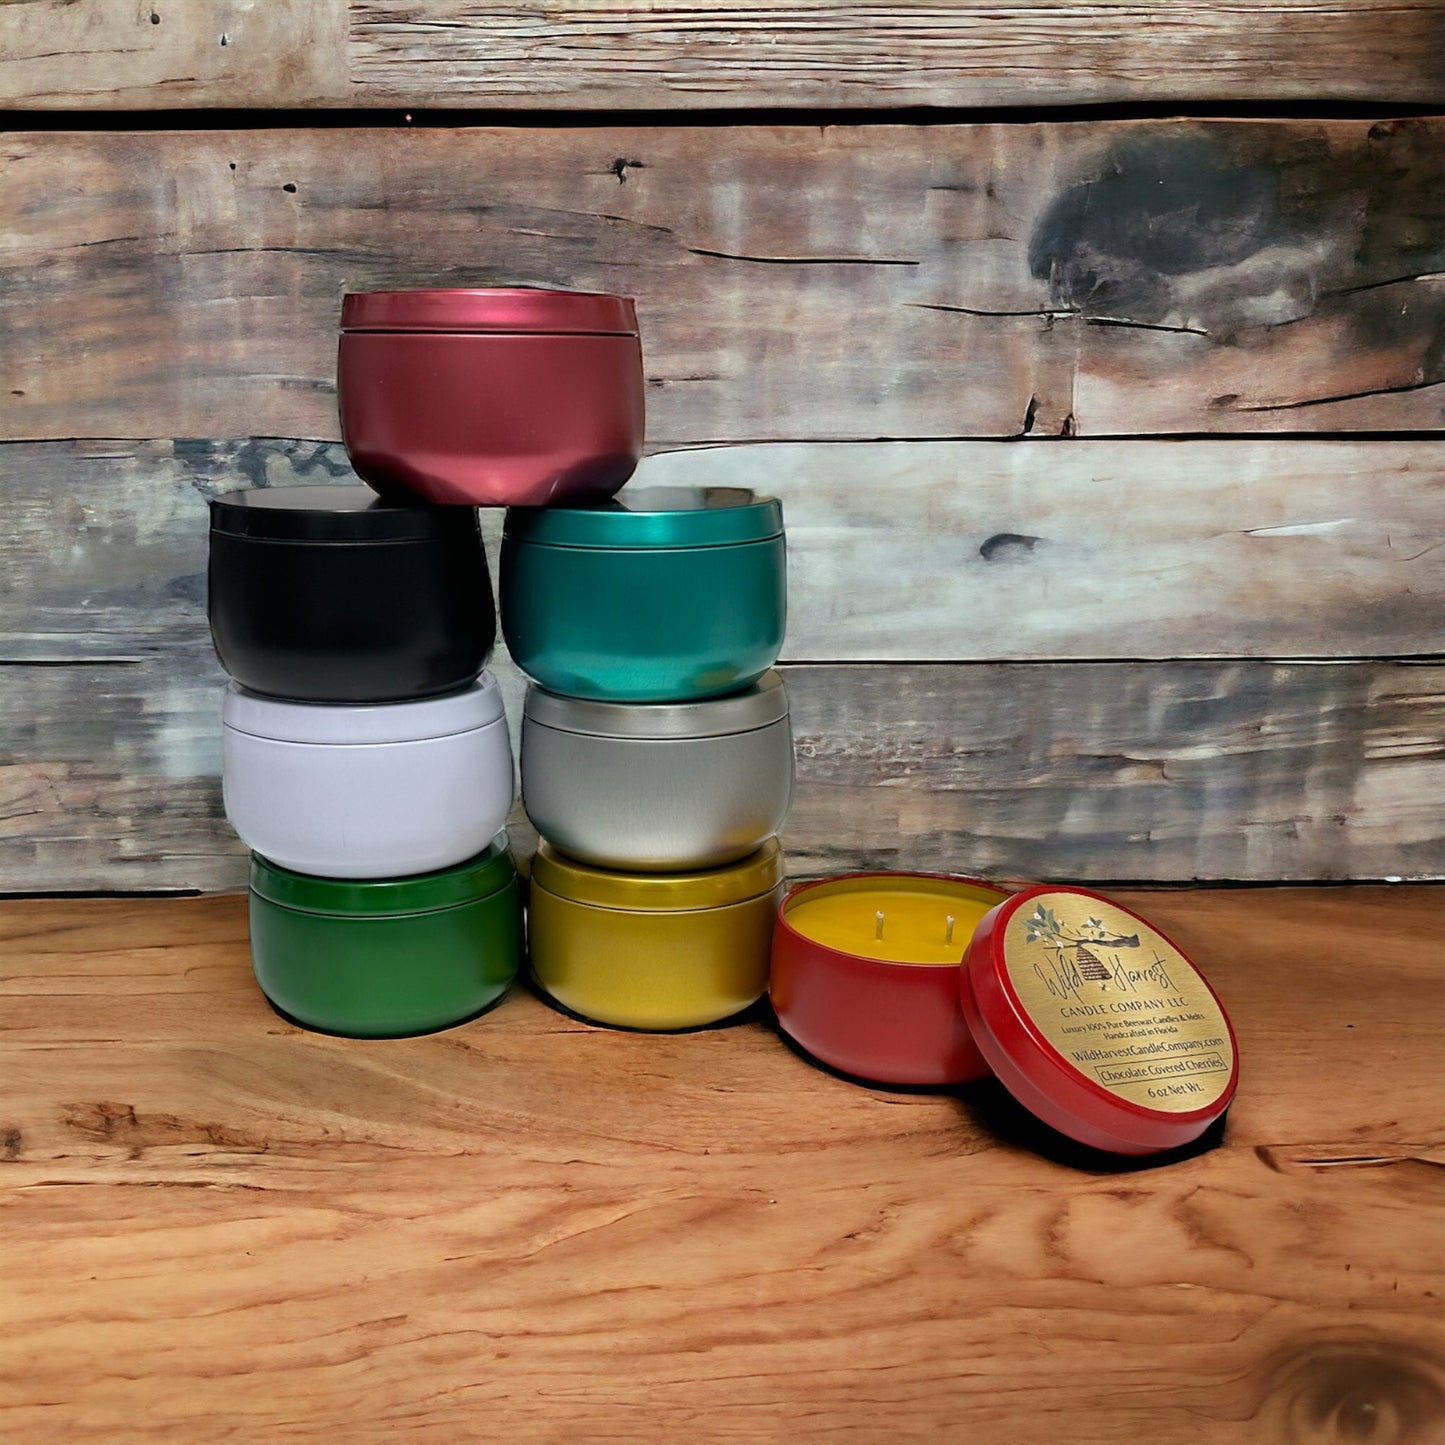 3-Pack Beeswax Candle Tins - 6 oz Size - Choose Your Favorite Scents & Color!